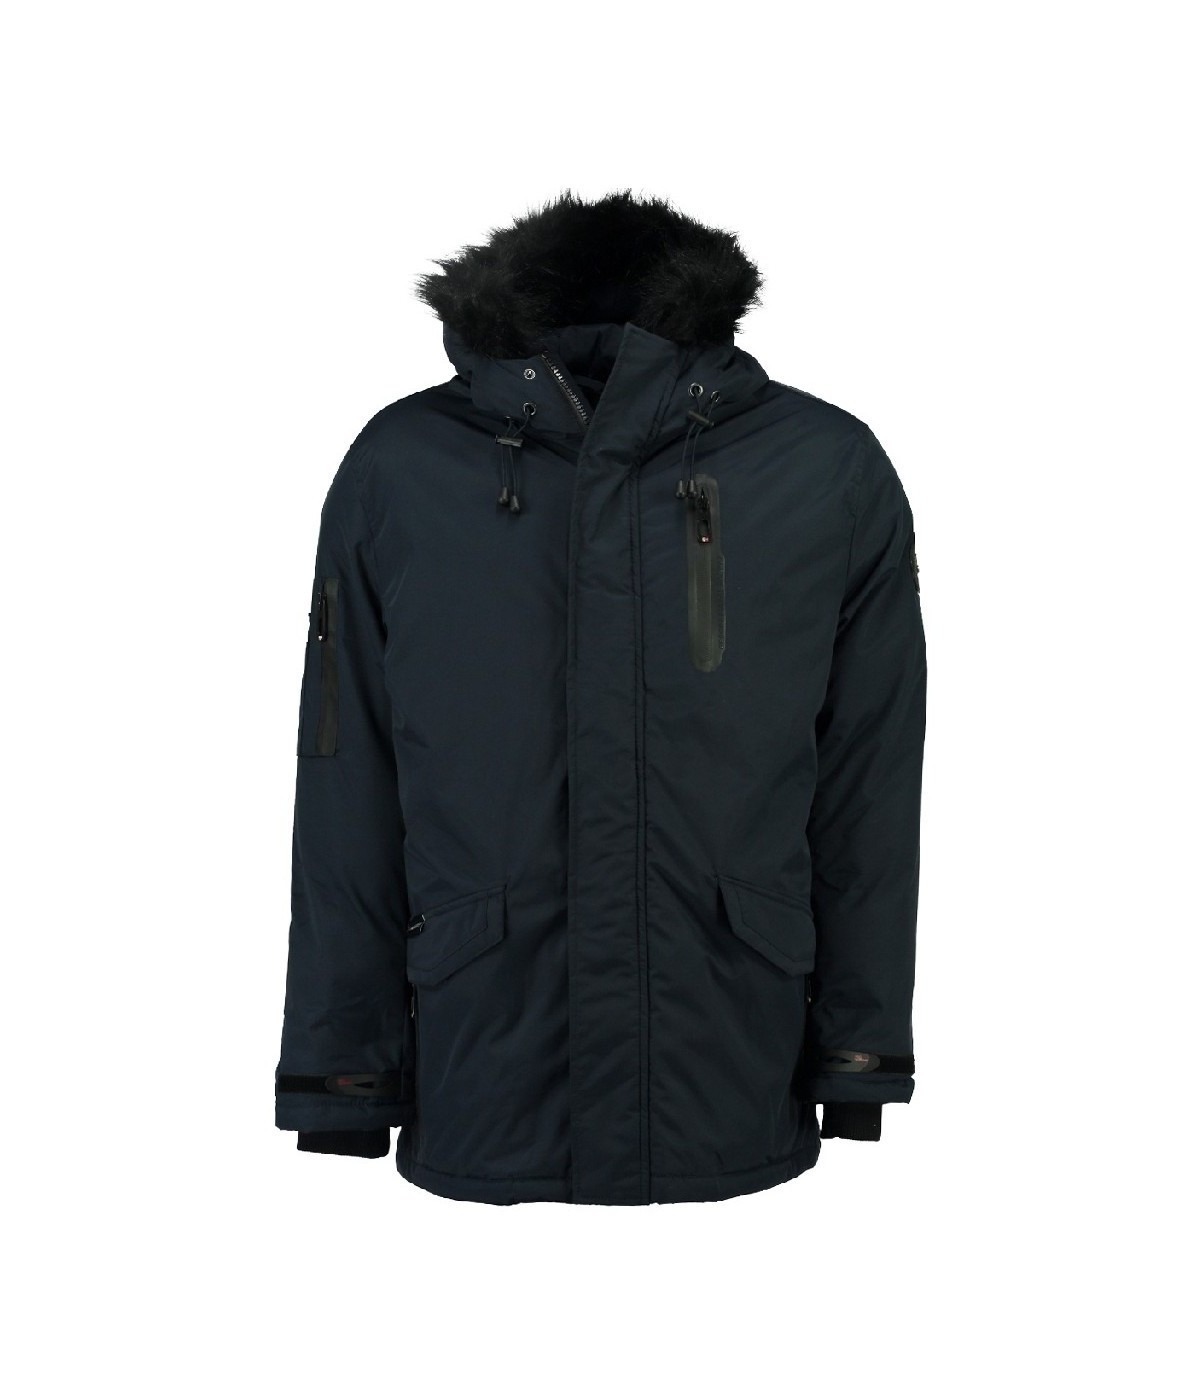 Parka Homme Geographical Norway Marine | SHOWROOMVIP : Parkas Homme